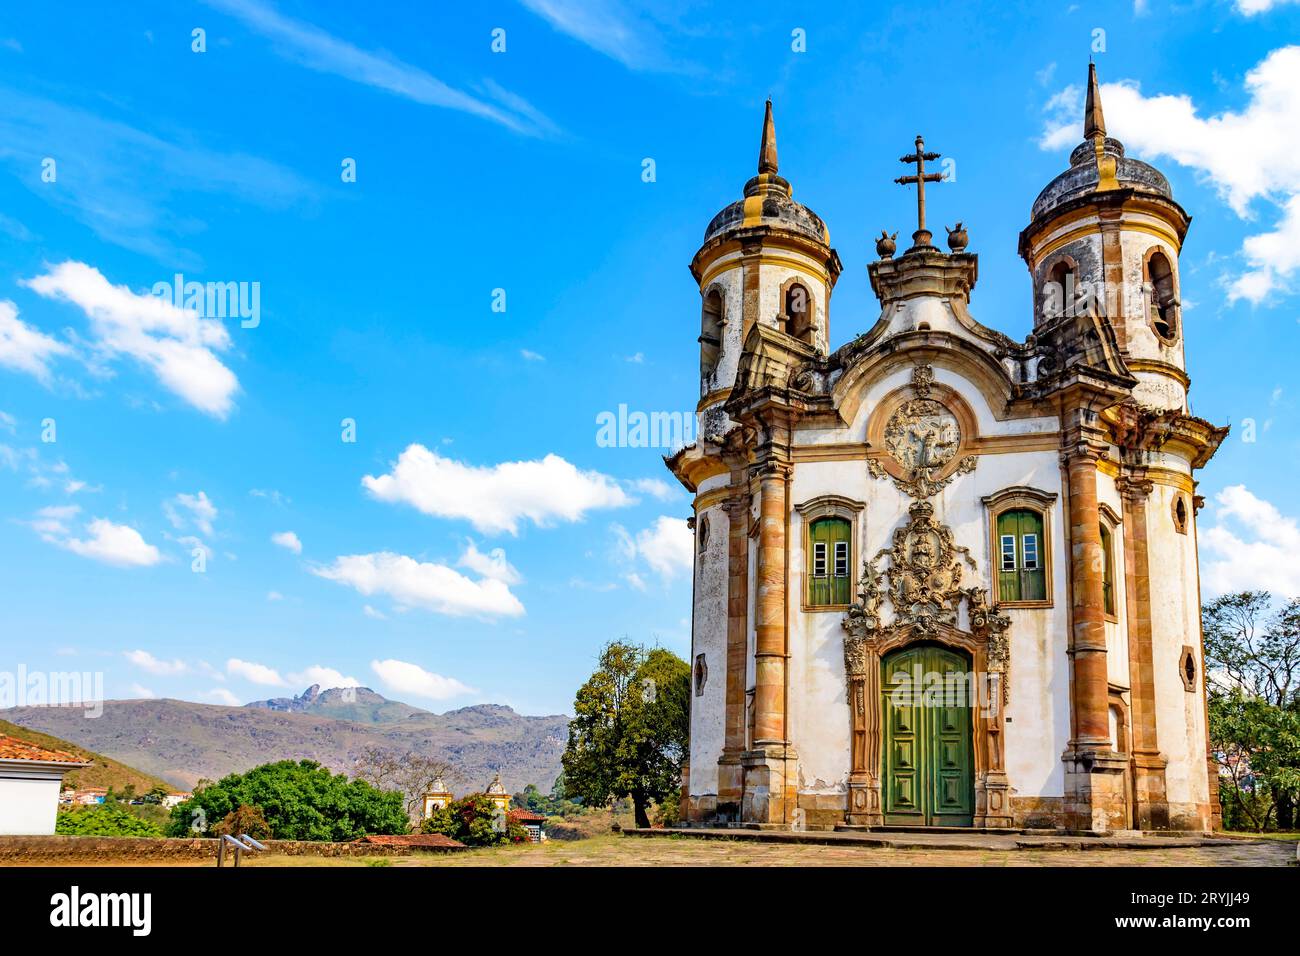 Front view of famous baroque church Stock Photo